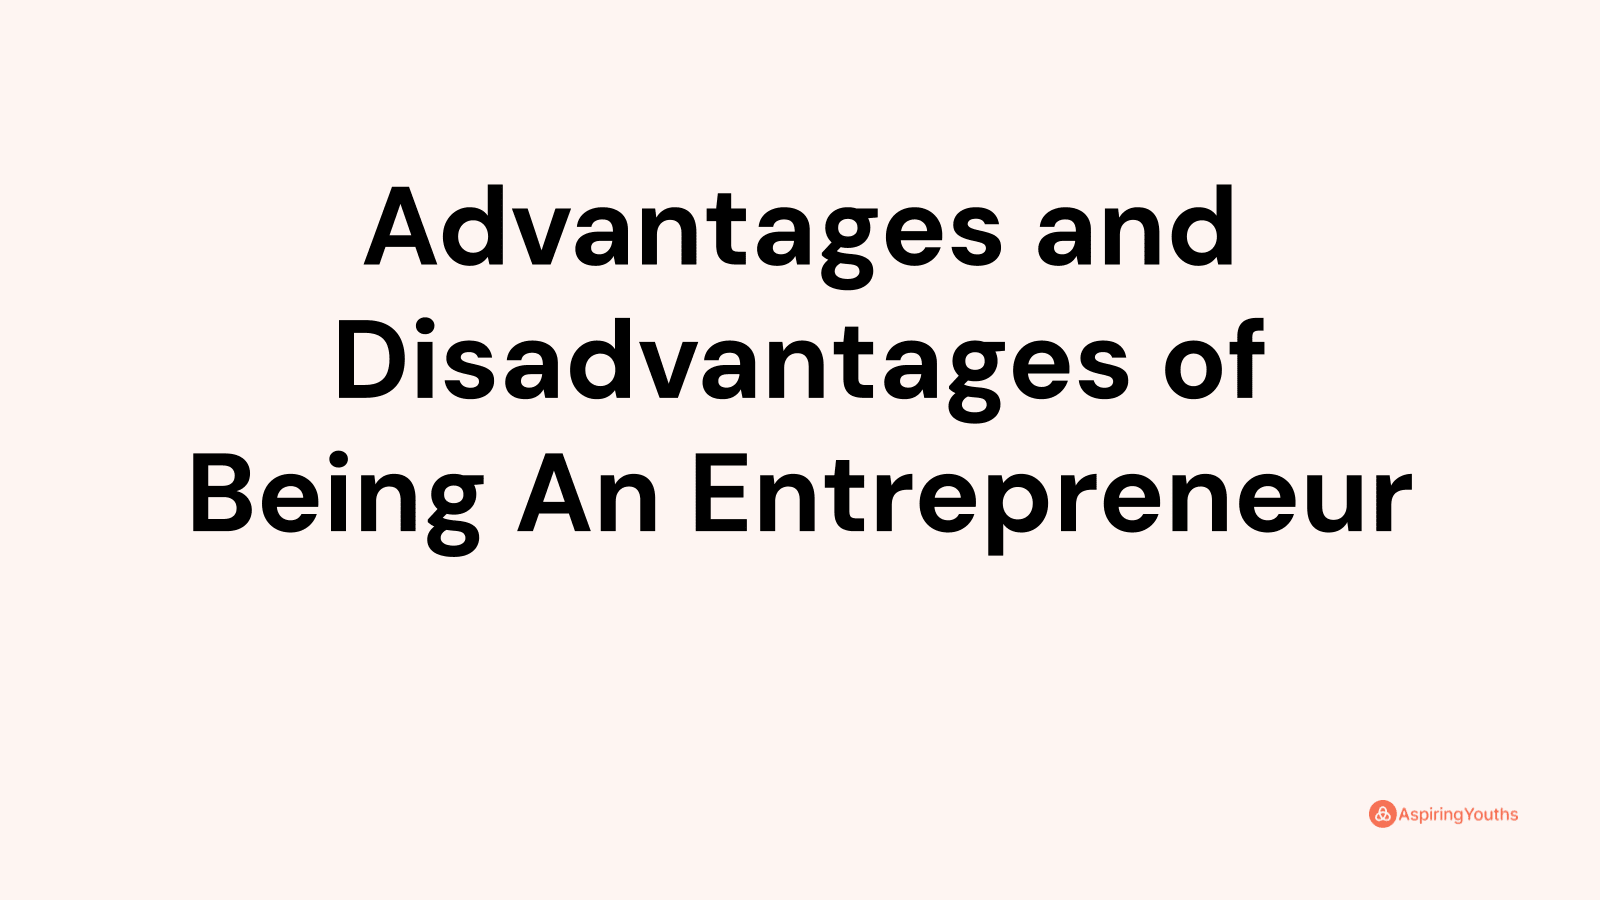 Advantages and disadvantages of Being An Entrepreneur